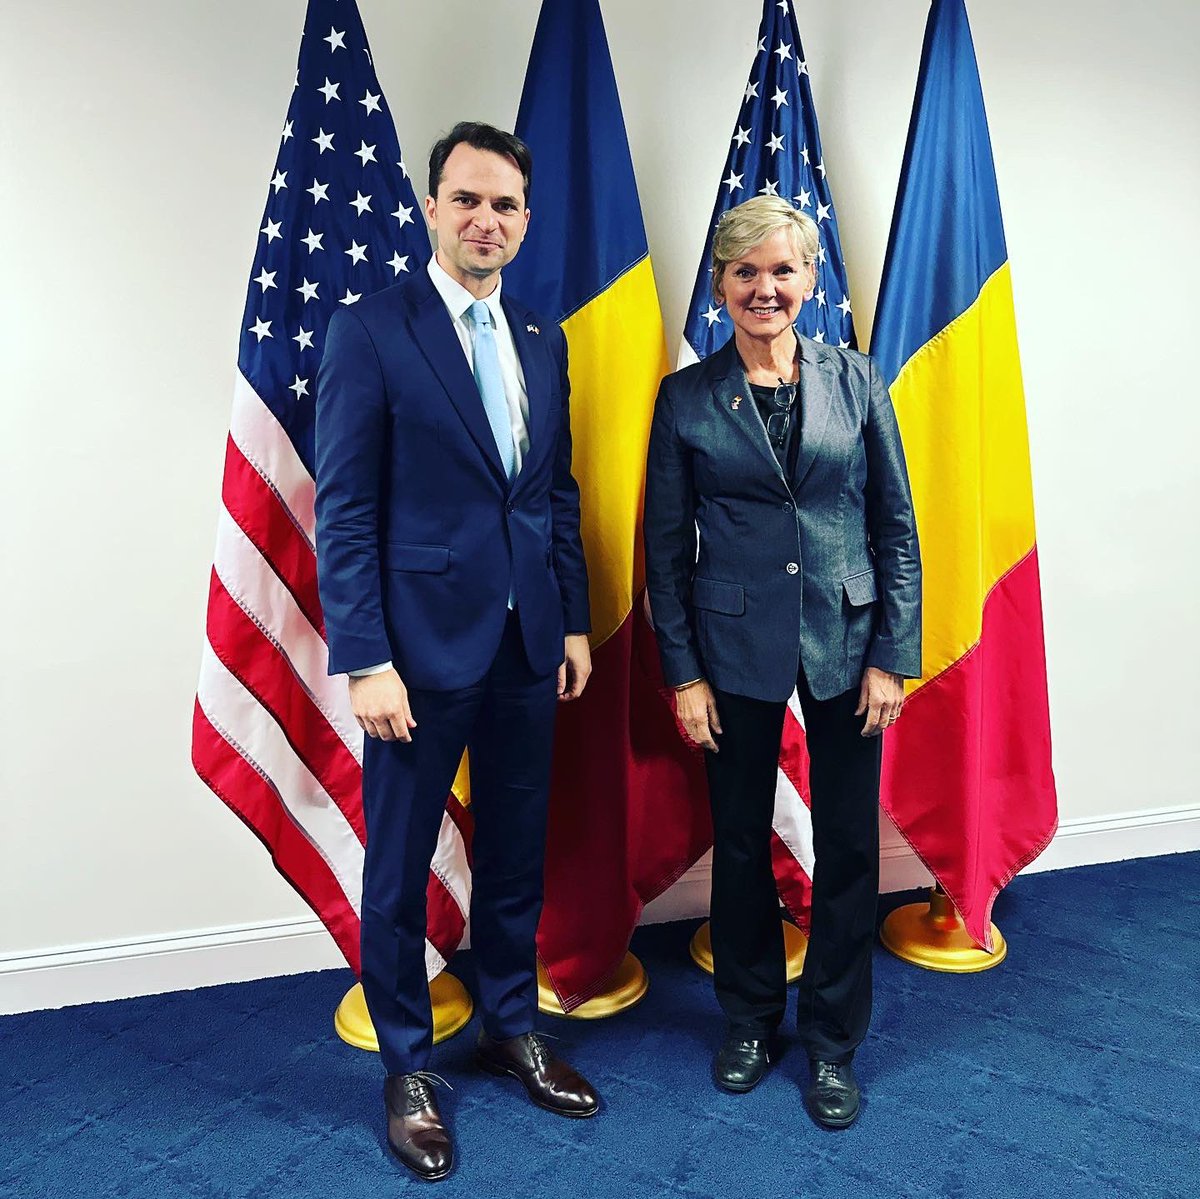 Great meeting US Secretary of Energy @SecGranholm. Romania is a pillar of stability, energy security, and respect for rule of law and liberal democracy in a very complicated region. This has not gone unnoticed in DC. We will continue to accelerate our joint efforts in energy 🇷🇴🇺🇸